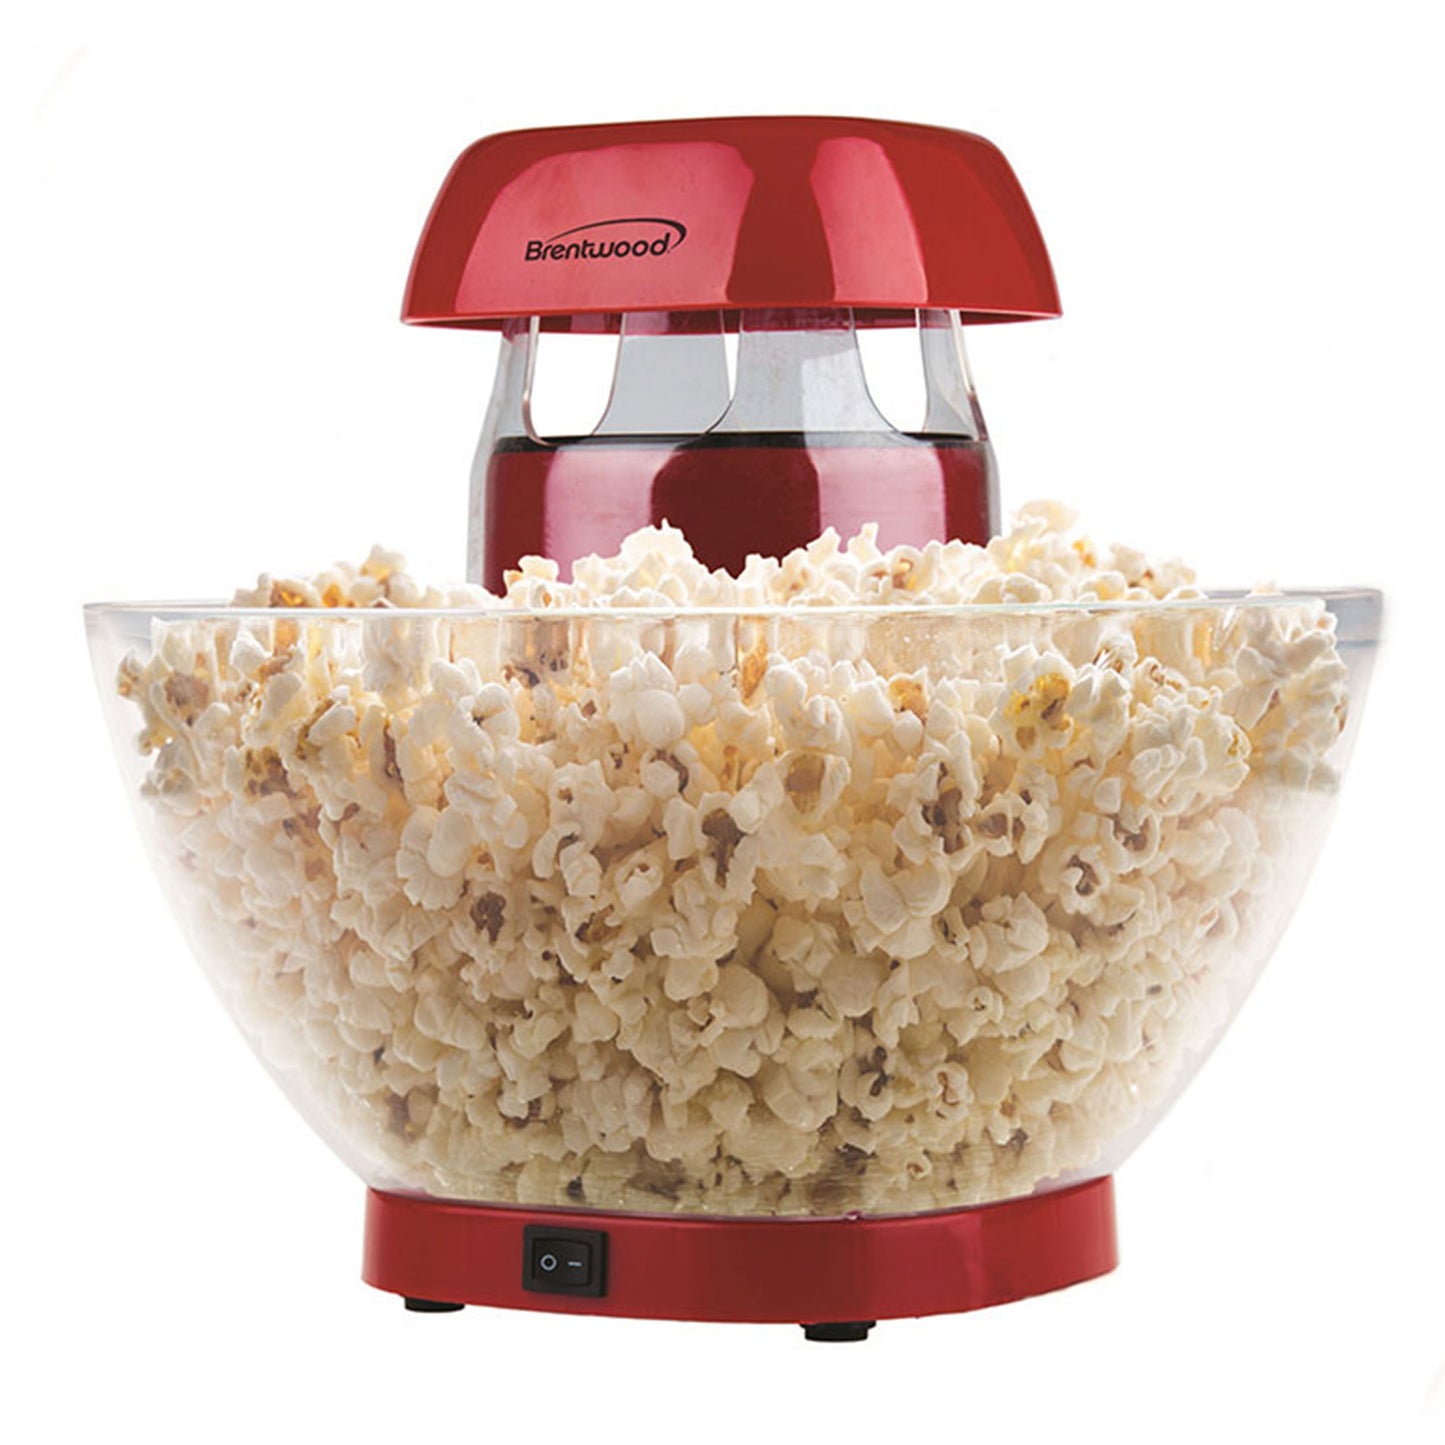 Brentwood Brentwood Jumbo 24-Cup Hot Air Popcorn Maker in Red